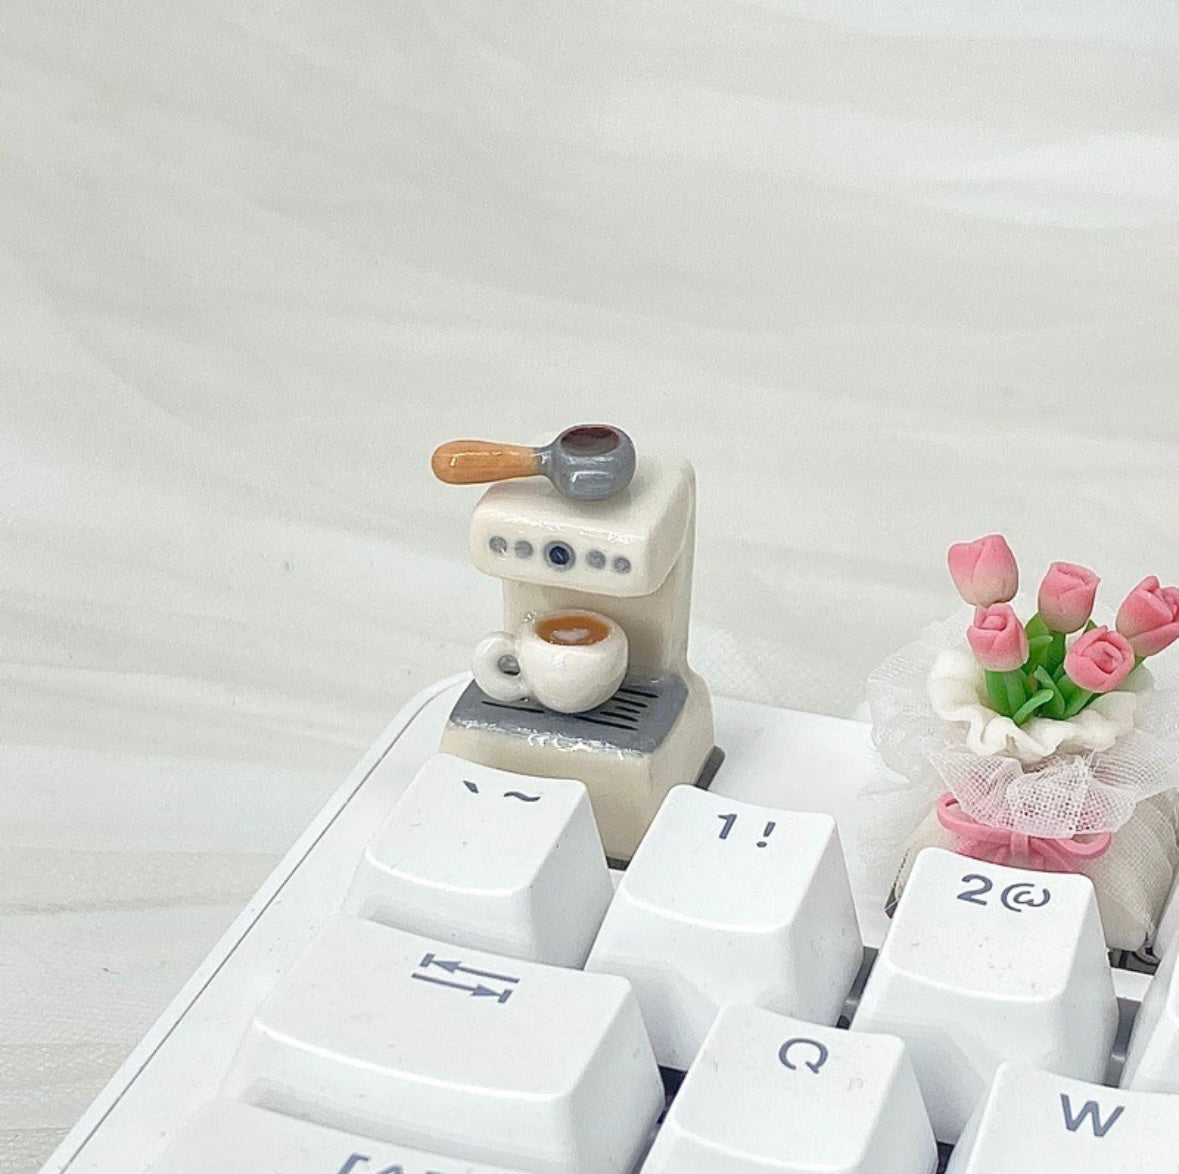 "Indulge in a coffee break with our 'Want a Cup of Coffee?' Custom Coffee Artisan Keycap. Handcrafted with care, this keycap features a steaming cup of coffee, perfect for coffee lovers. It's a charming addition to your keyboard, inviting you to savor every keystroke with a hint of caffeine charm. Elevate your setup with this unique and delightful artisan keycap." ☕💻 #Keycaps #ArtisanKeycaps #CoffeeLovers